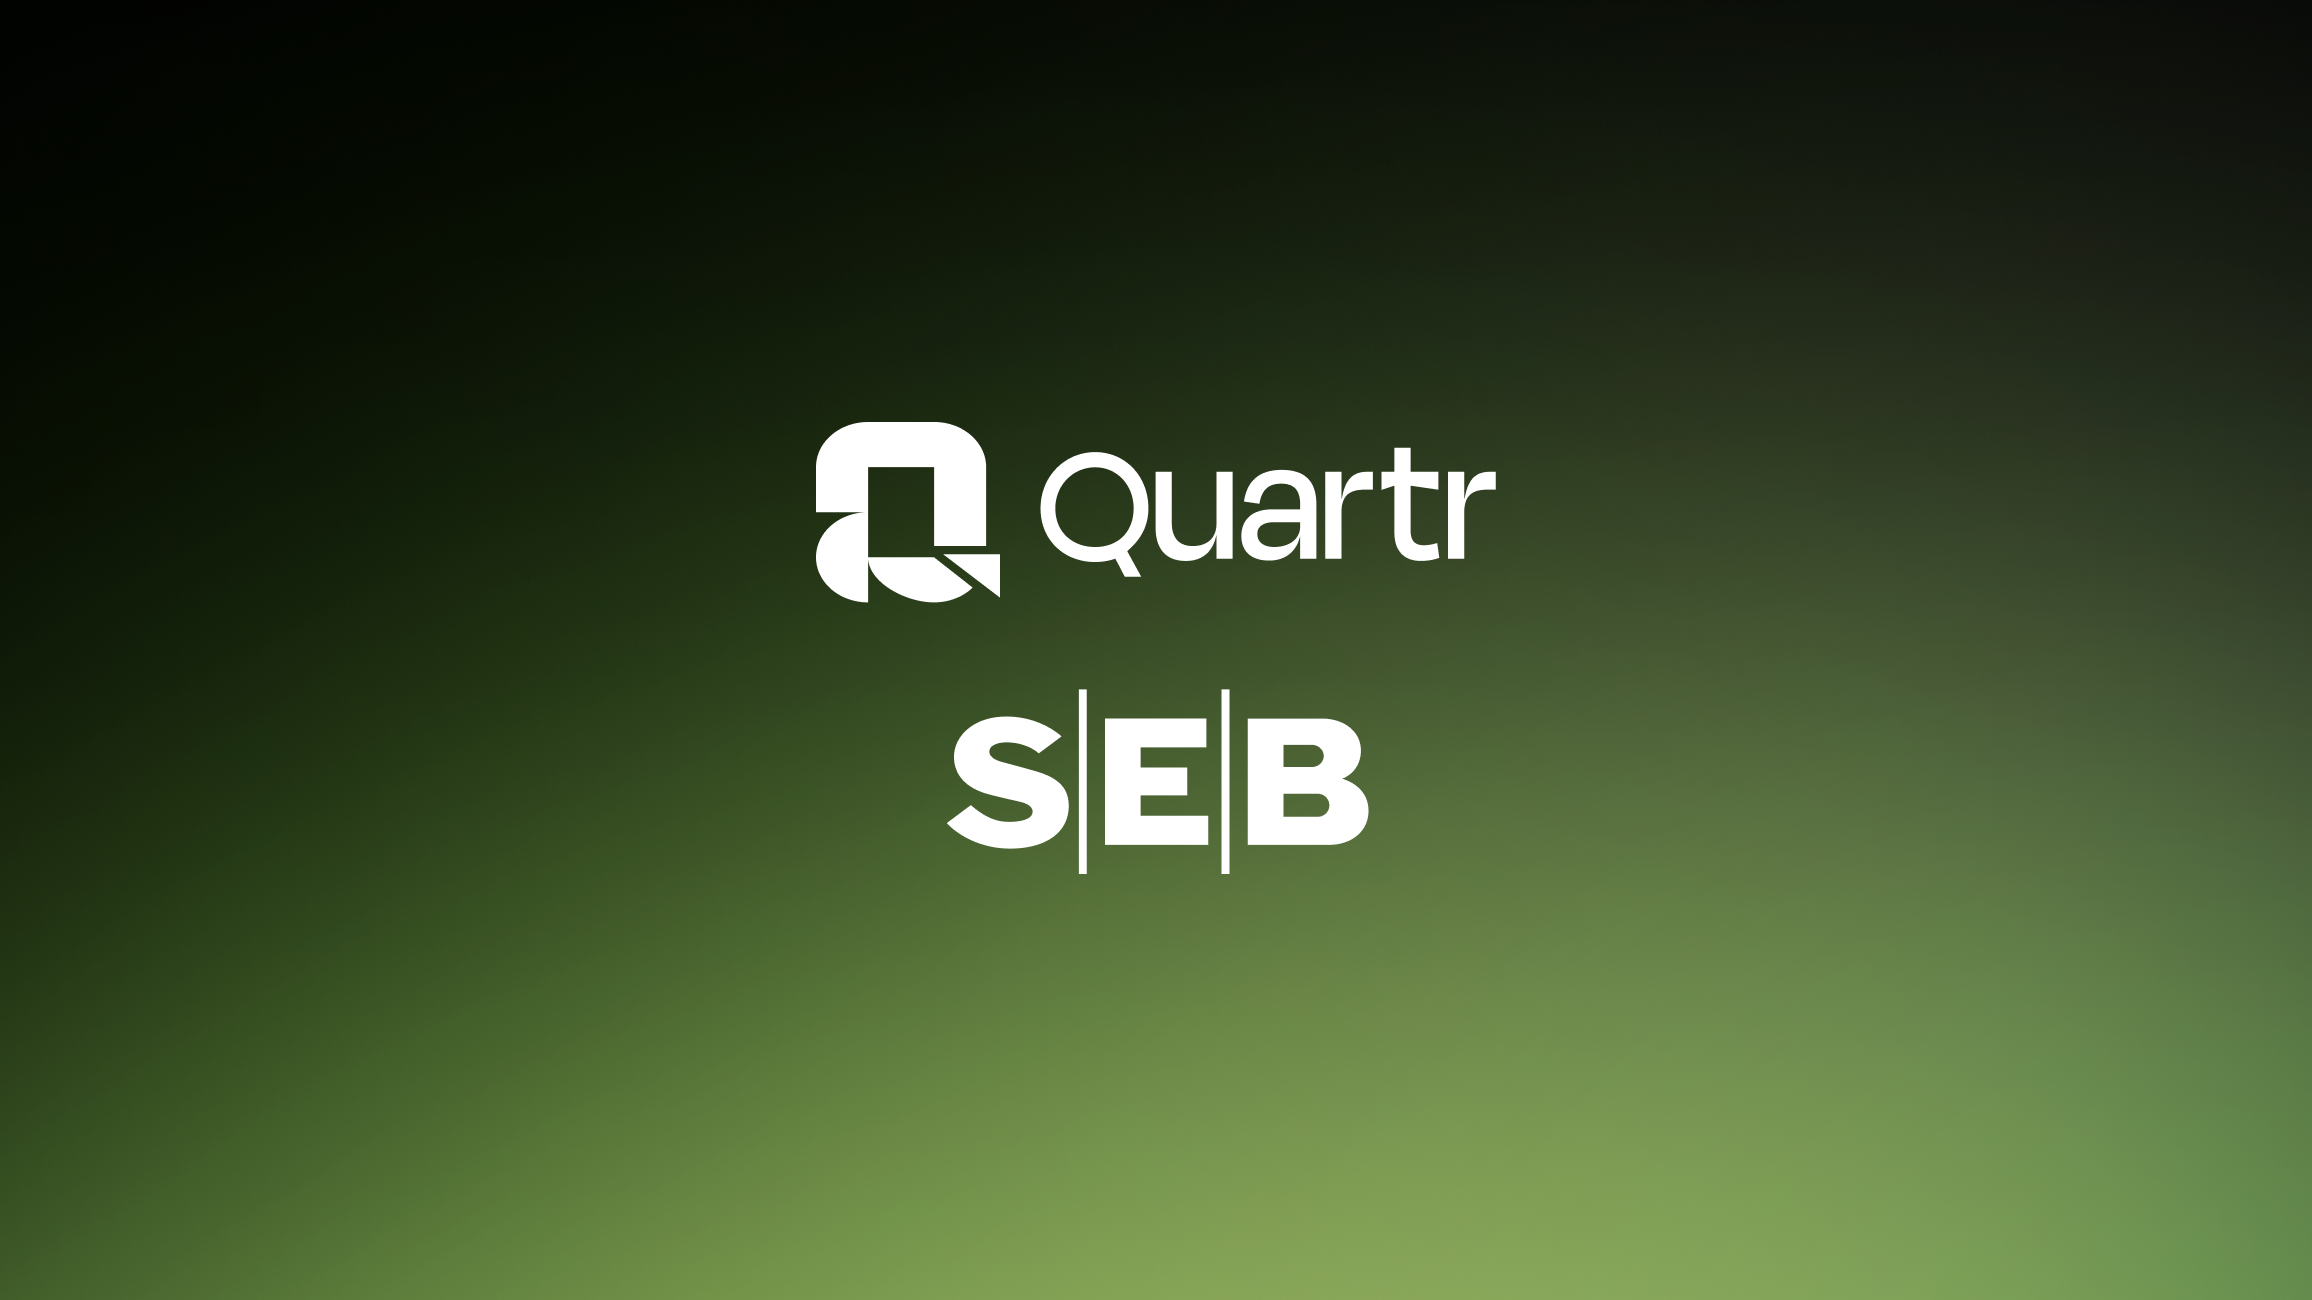 Quartr signs one of its largest API deals to date, partnering up with SEB